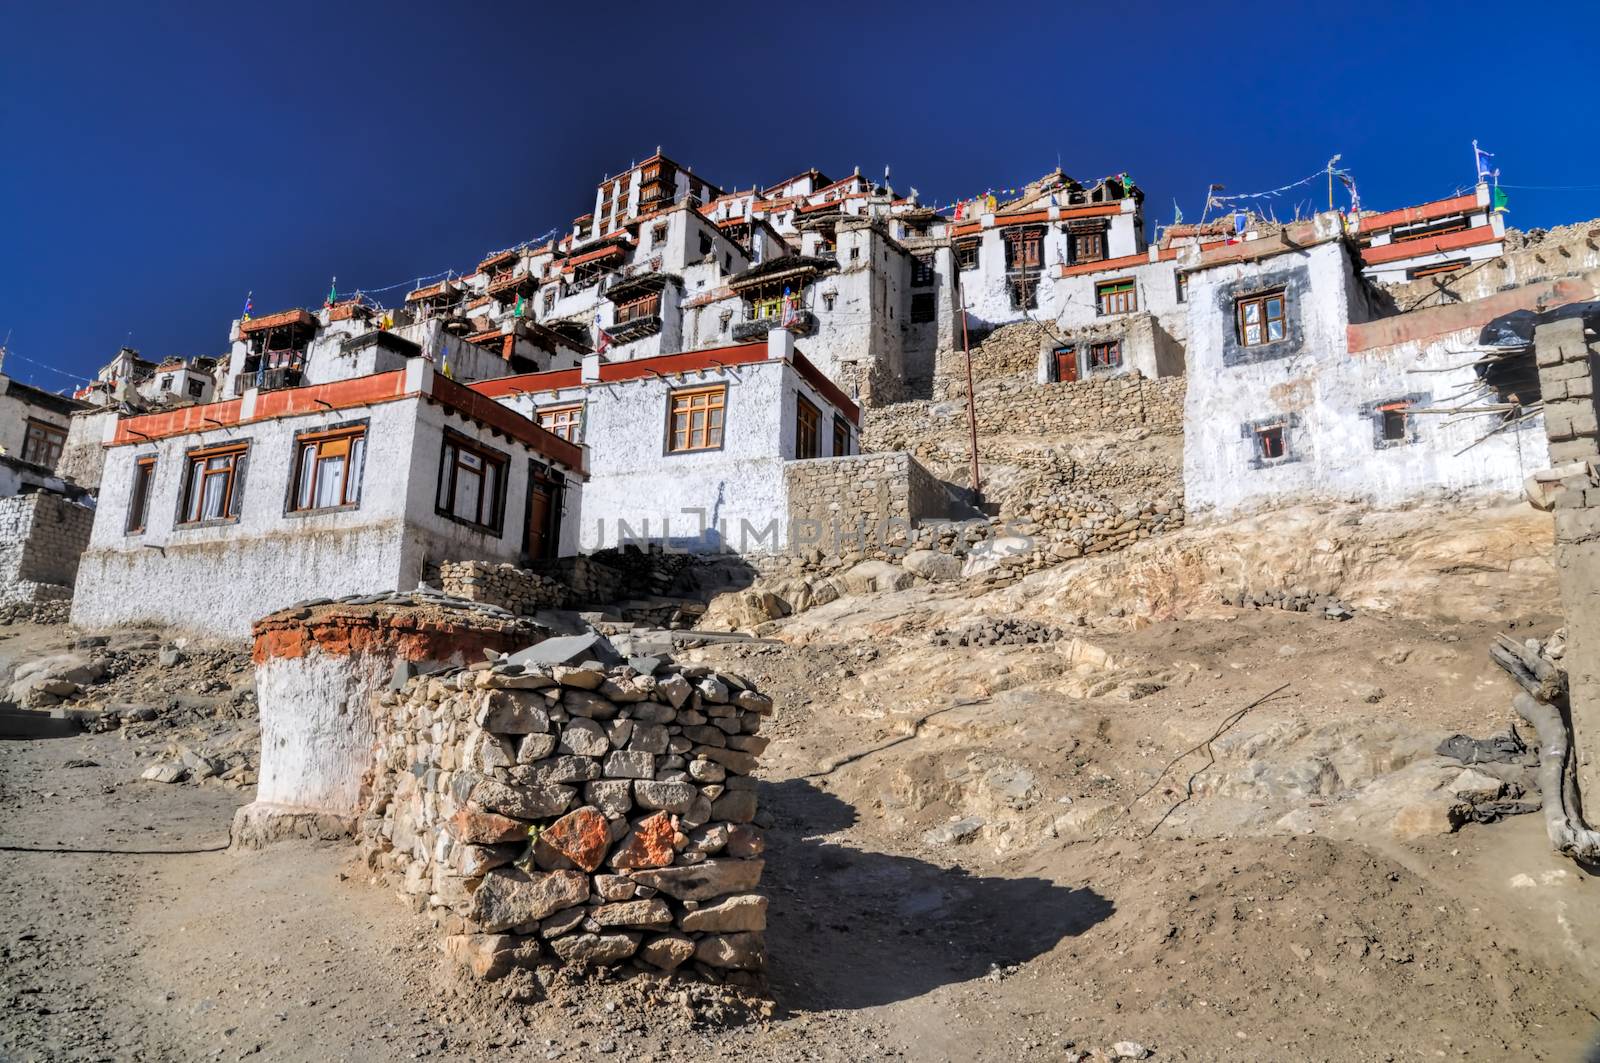 Picturesque view of shrines and temples of Chemrey monastery in Ladakh